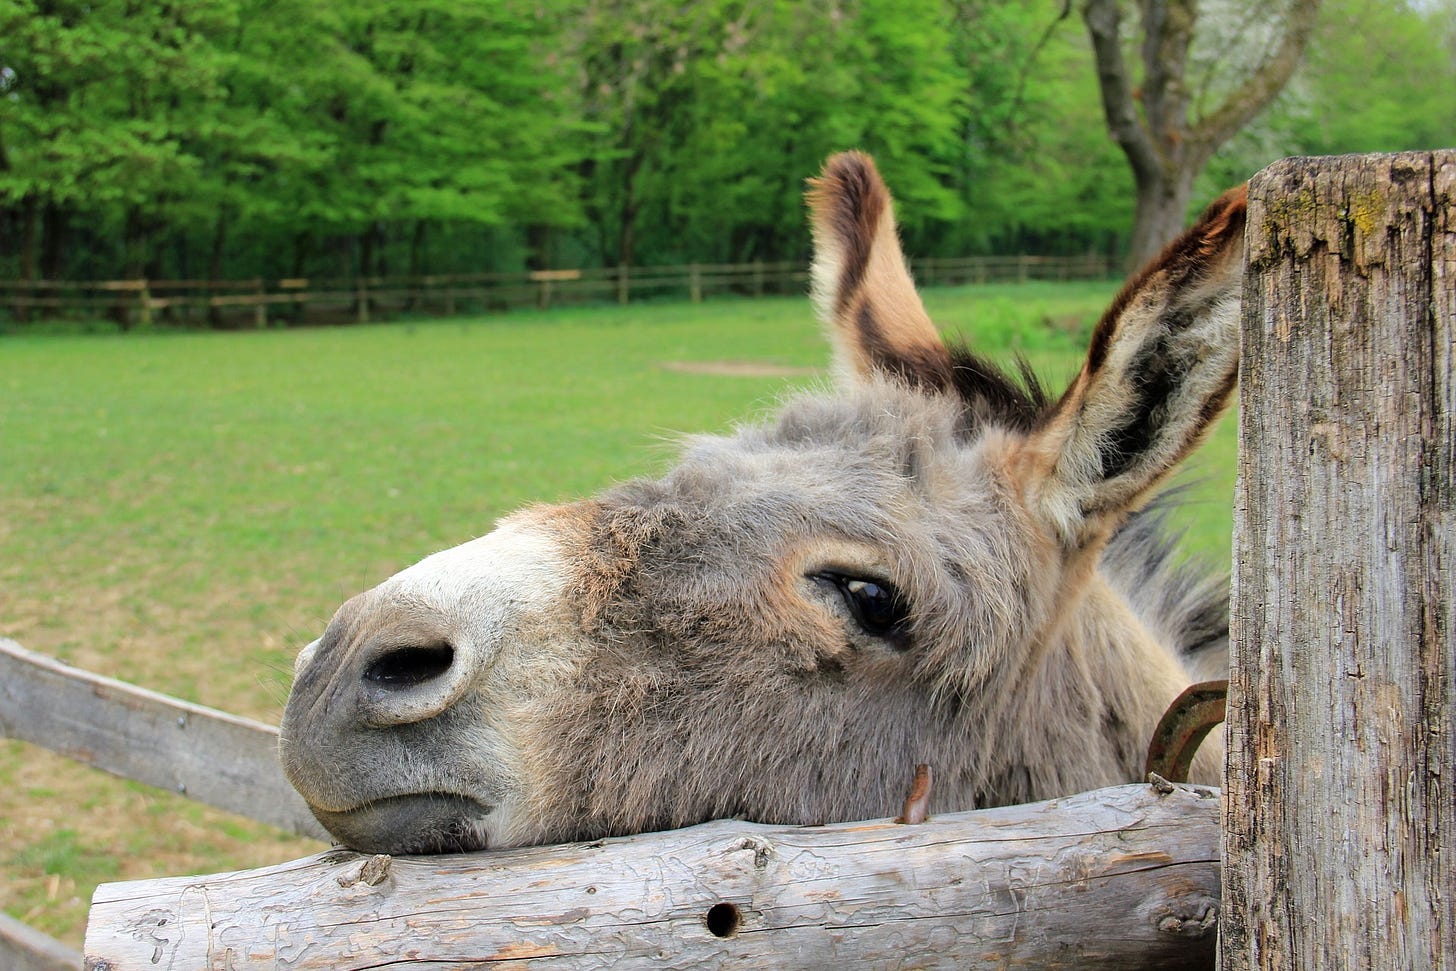 Donkey with a sweet face